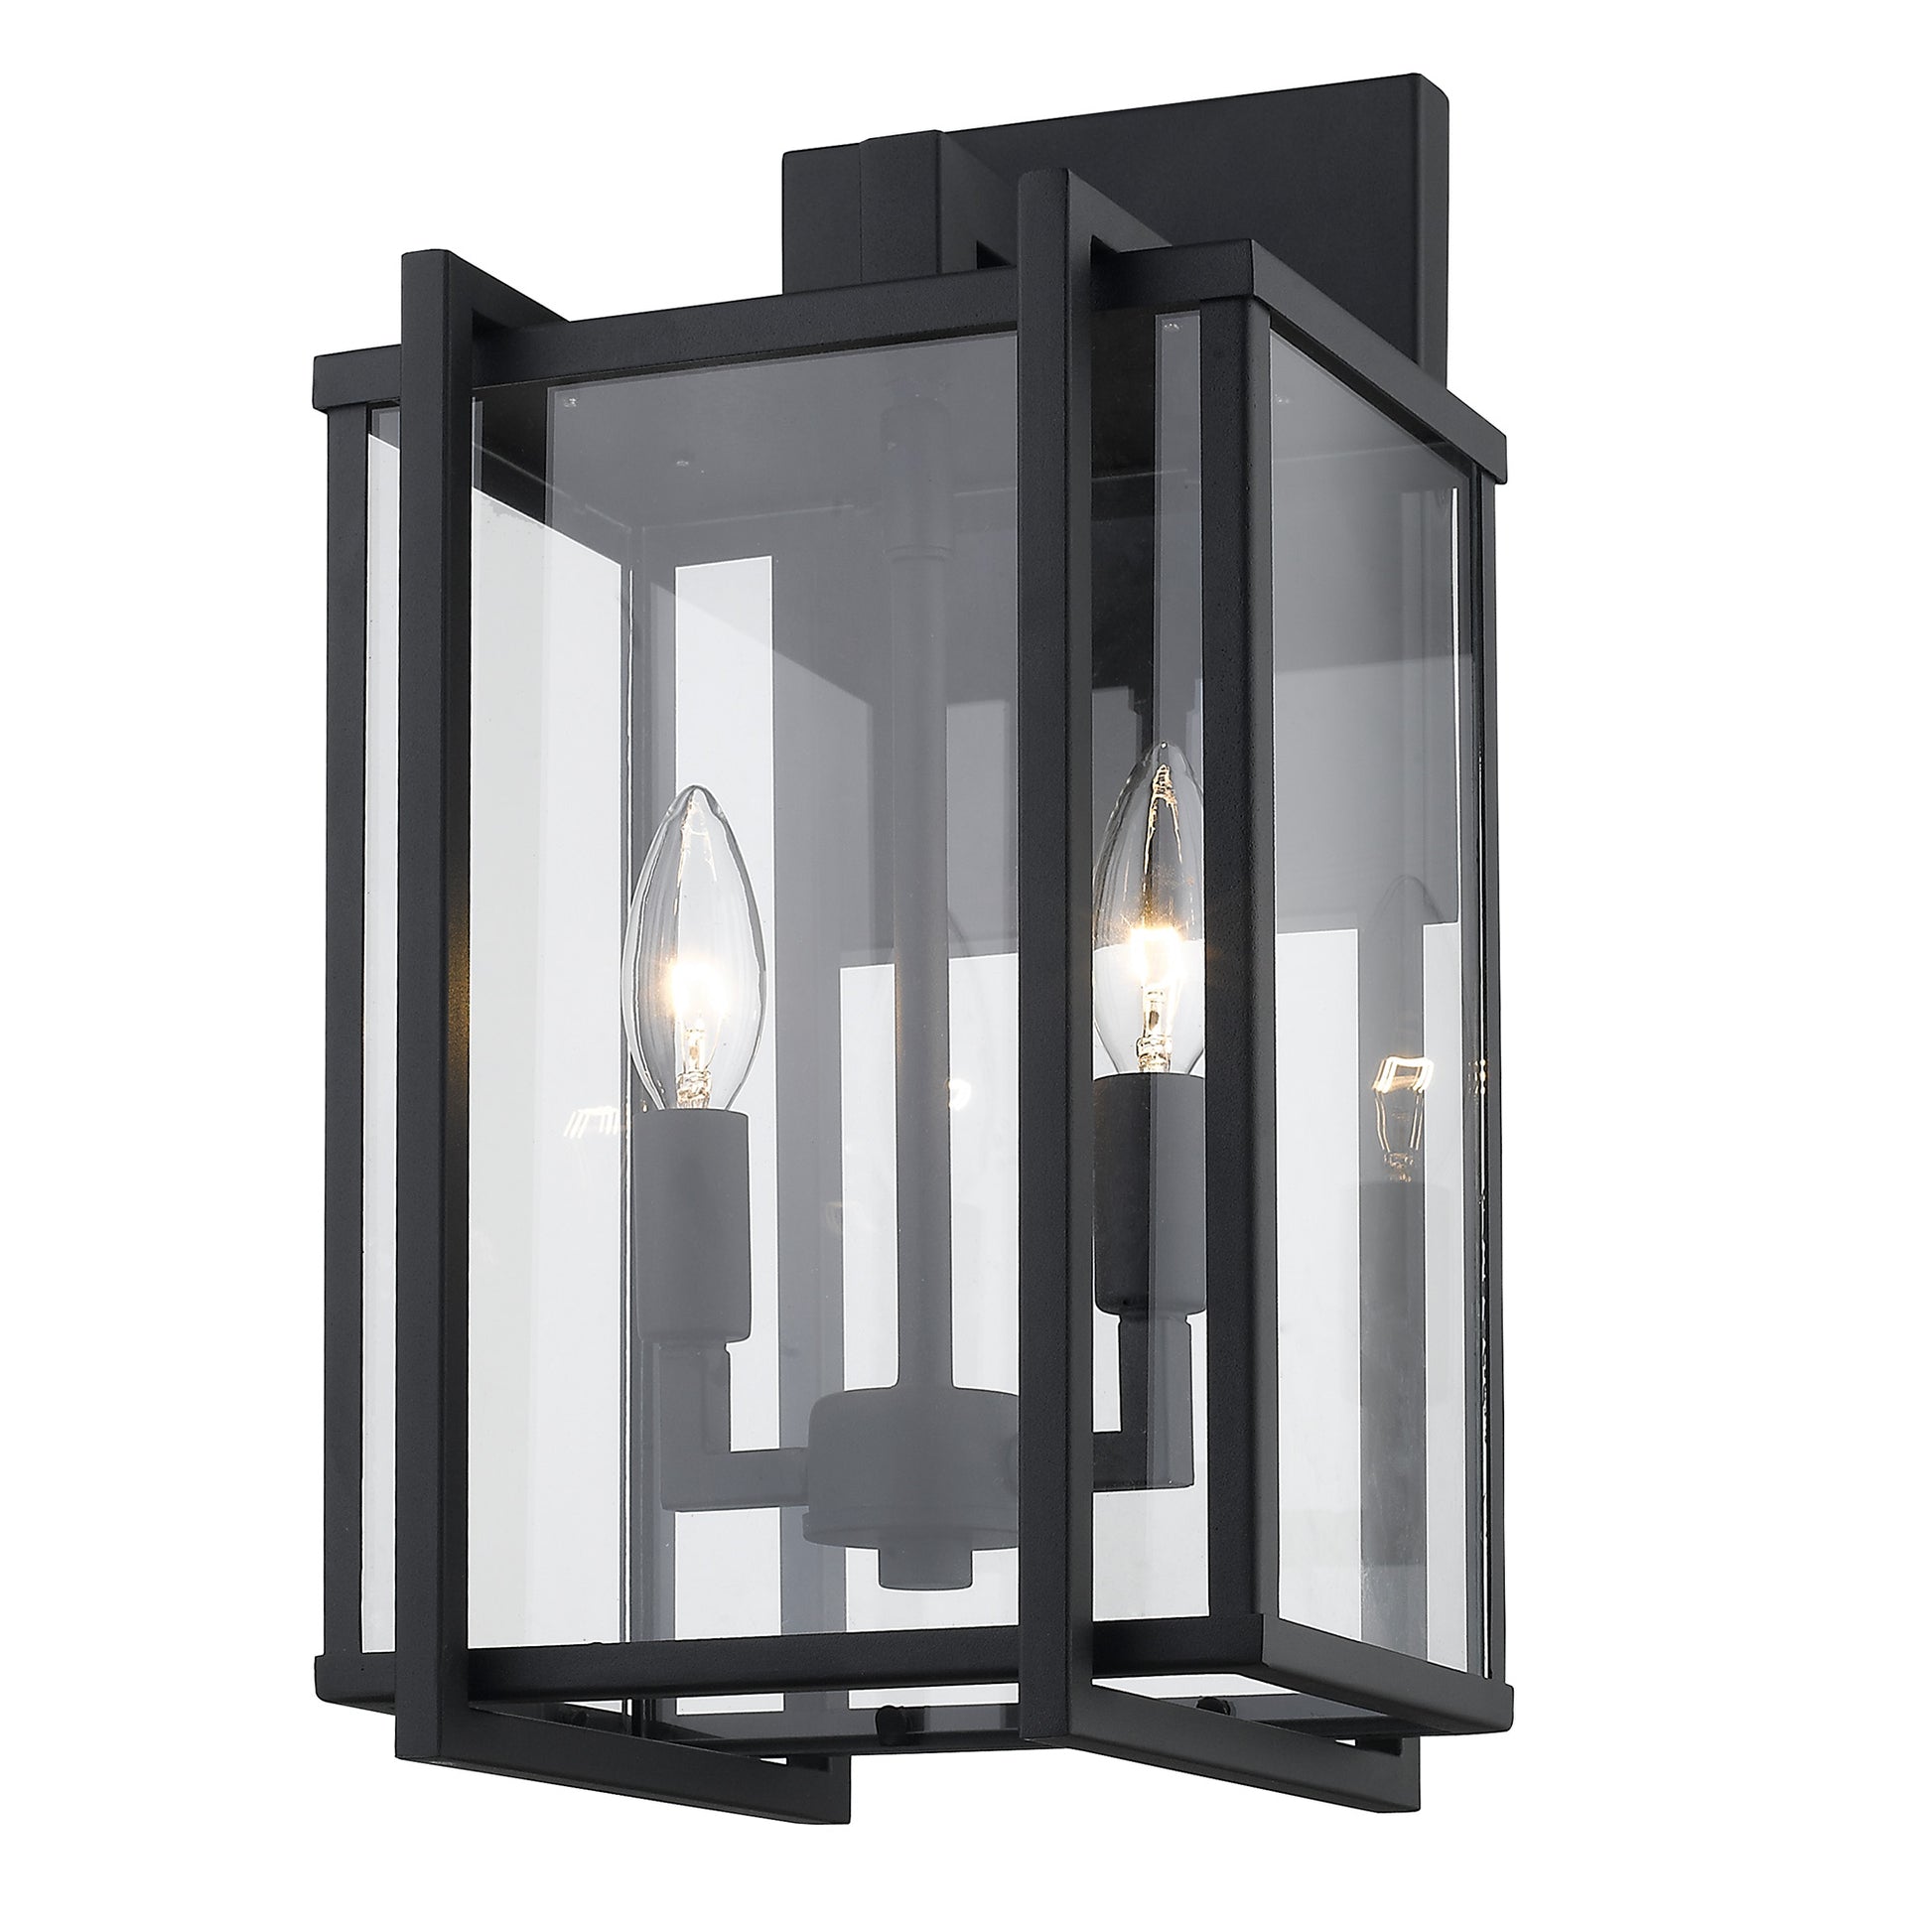 Modern | Industrial-Inspired Large Outdoor Wall Sconce